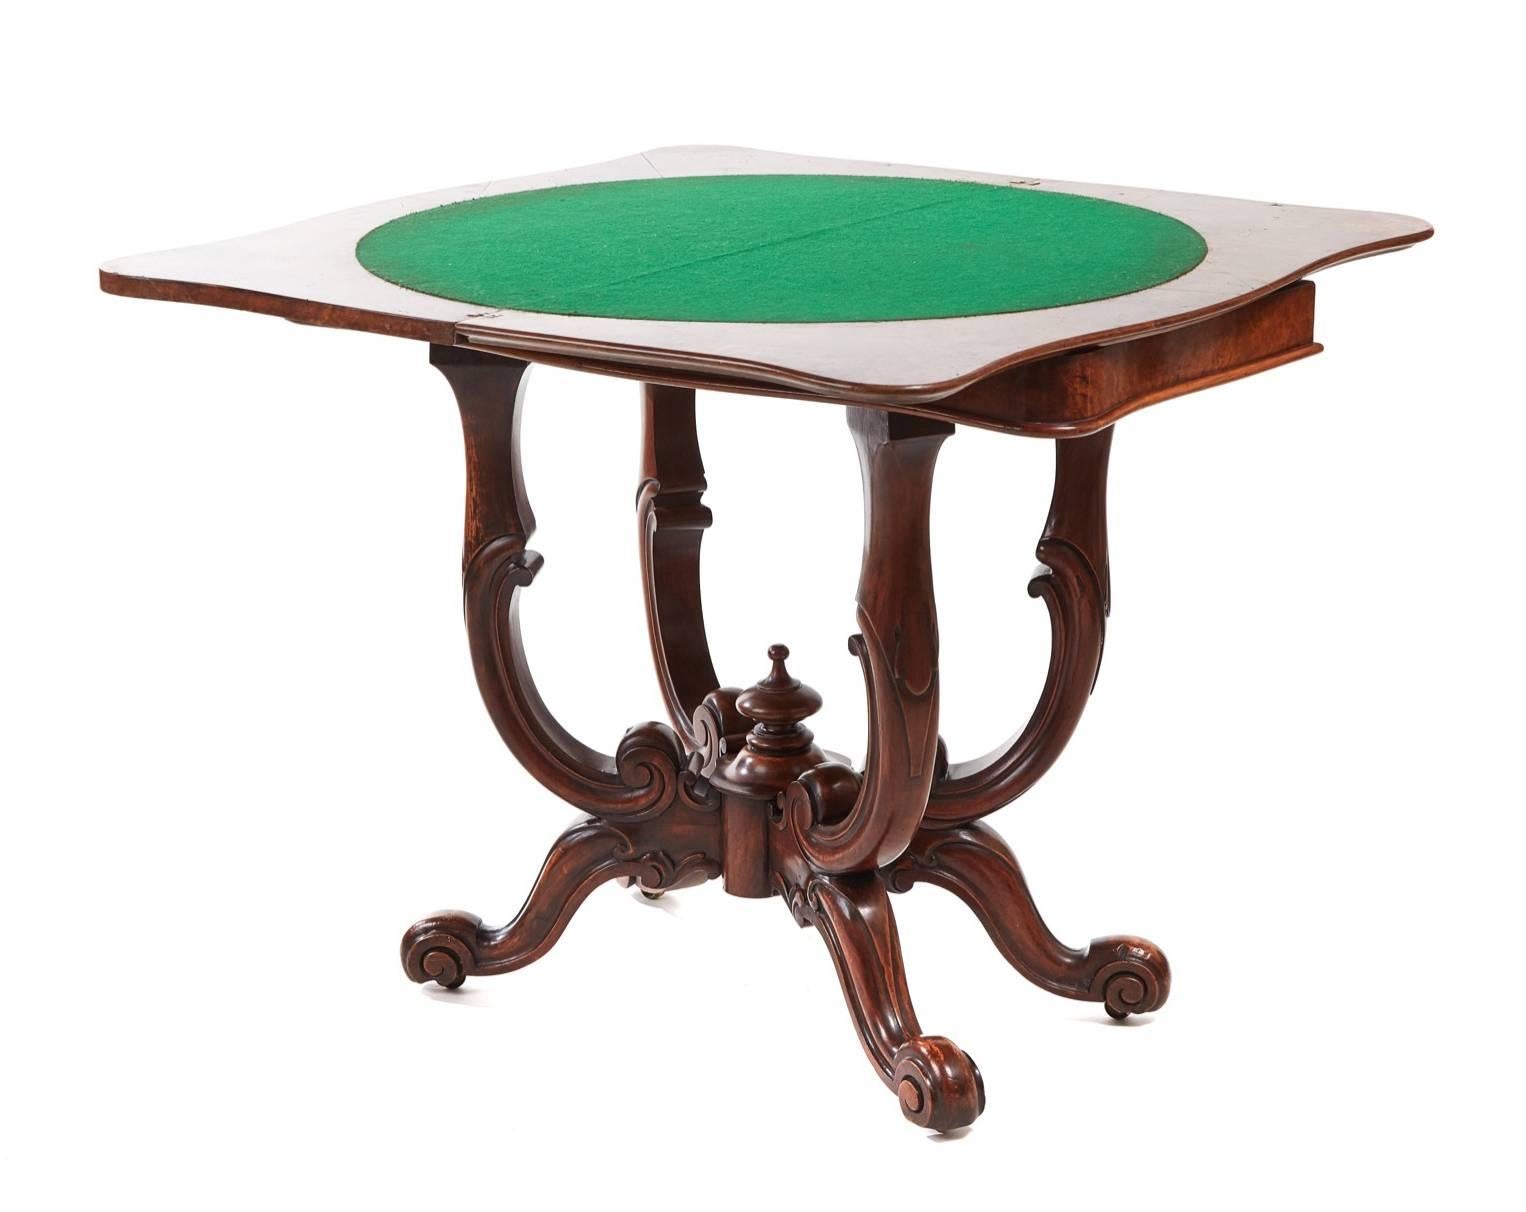 Unusual Victorian burr walnut basket base card table, having a burr walnut serpentine shaped swivel top with thumb moulded edge, green baize interior, the unusual solid walnut shaped scrolling basket base with lovely shaped cabriole legs on original